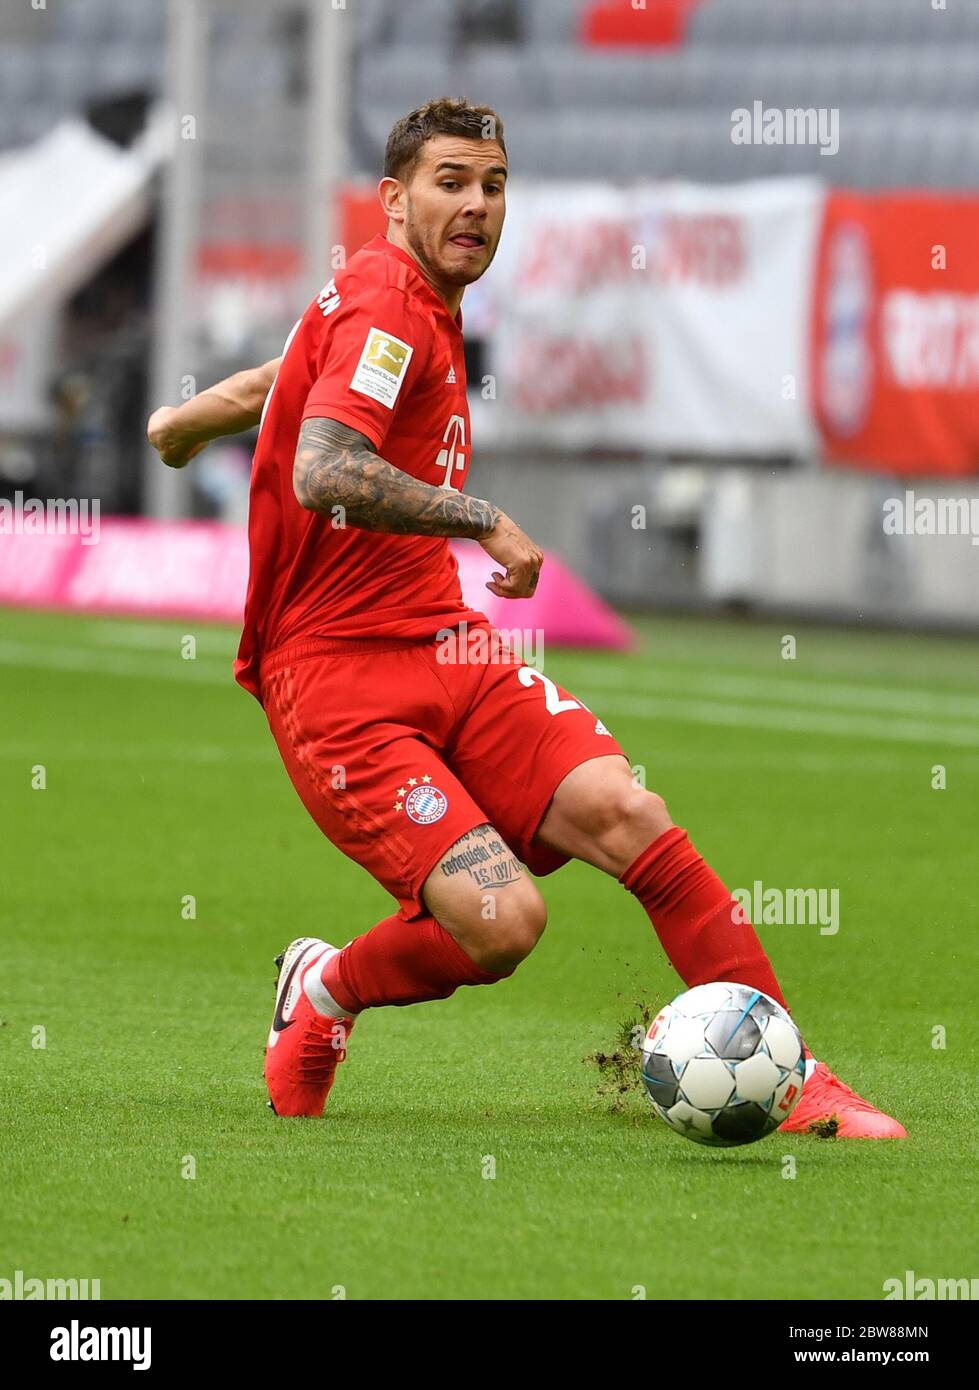 Muenchen, Deutschland, 30. Mai 2020,  Lucas HERNANDEZ (FCB 21)  beim Spiel 1.Bundesliga FC BAYERN MUENCHEN - FORTUNA DUESSELDORF in der Saison 2019/2020 am 29.Spieltag. Foto: © Peter Schatz / Alamy Live News / Frank Hoermann/Sven Simon/Pool    - DFL REGULATIONS PROHIBIT ANY USE OF PHOTOGRAPHS as IMAGE SEQUENCES and/or QUASI-VIDEO -   National and international News-Agencies OUT  Editorial Use ONLY Stock Photo